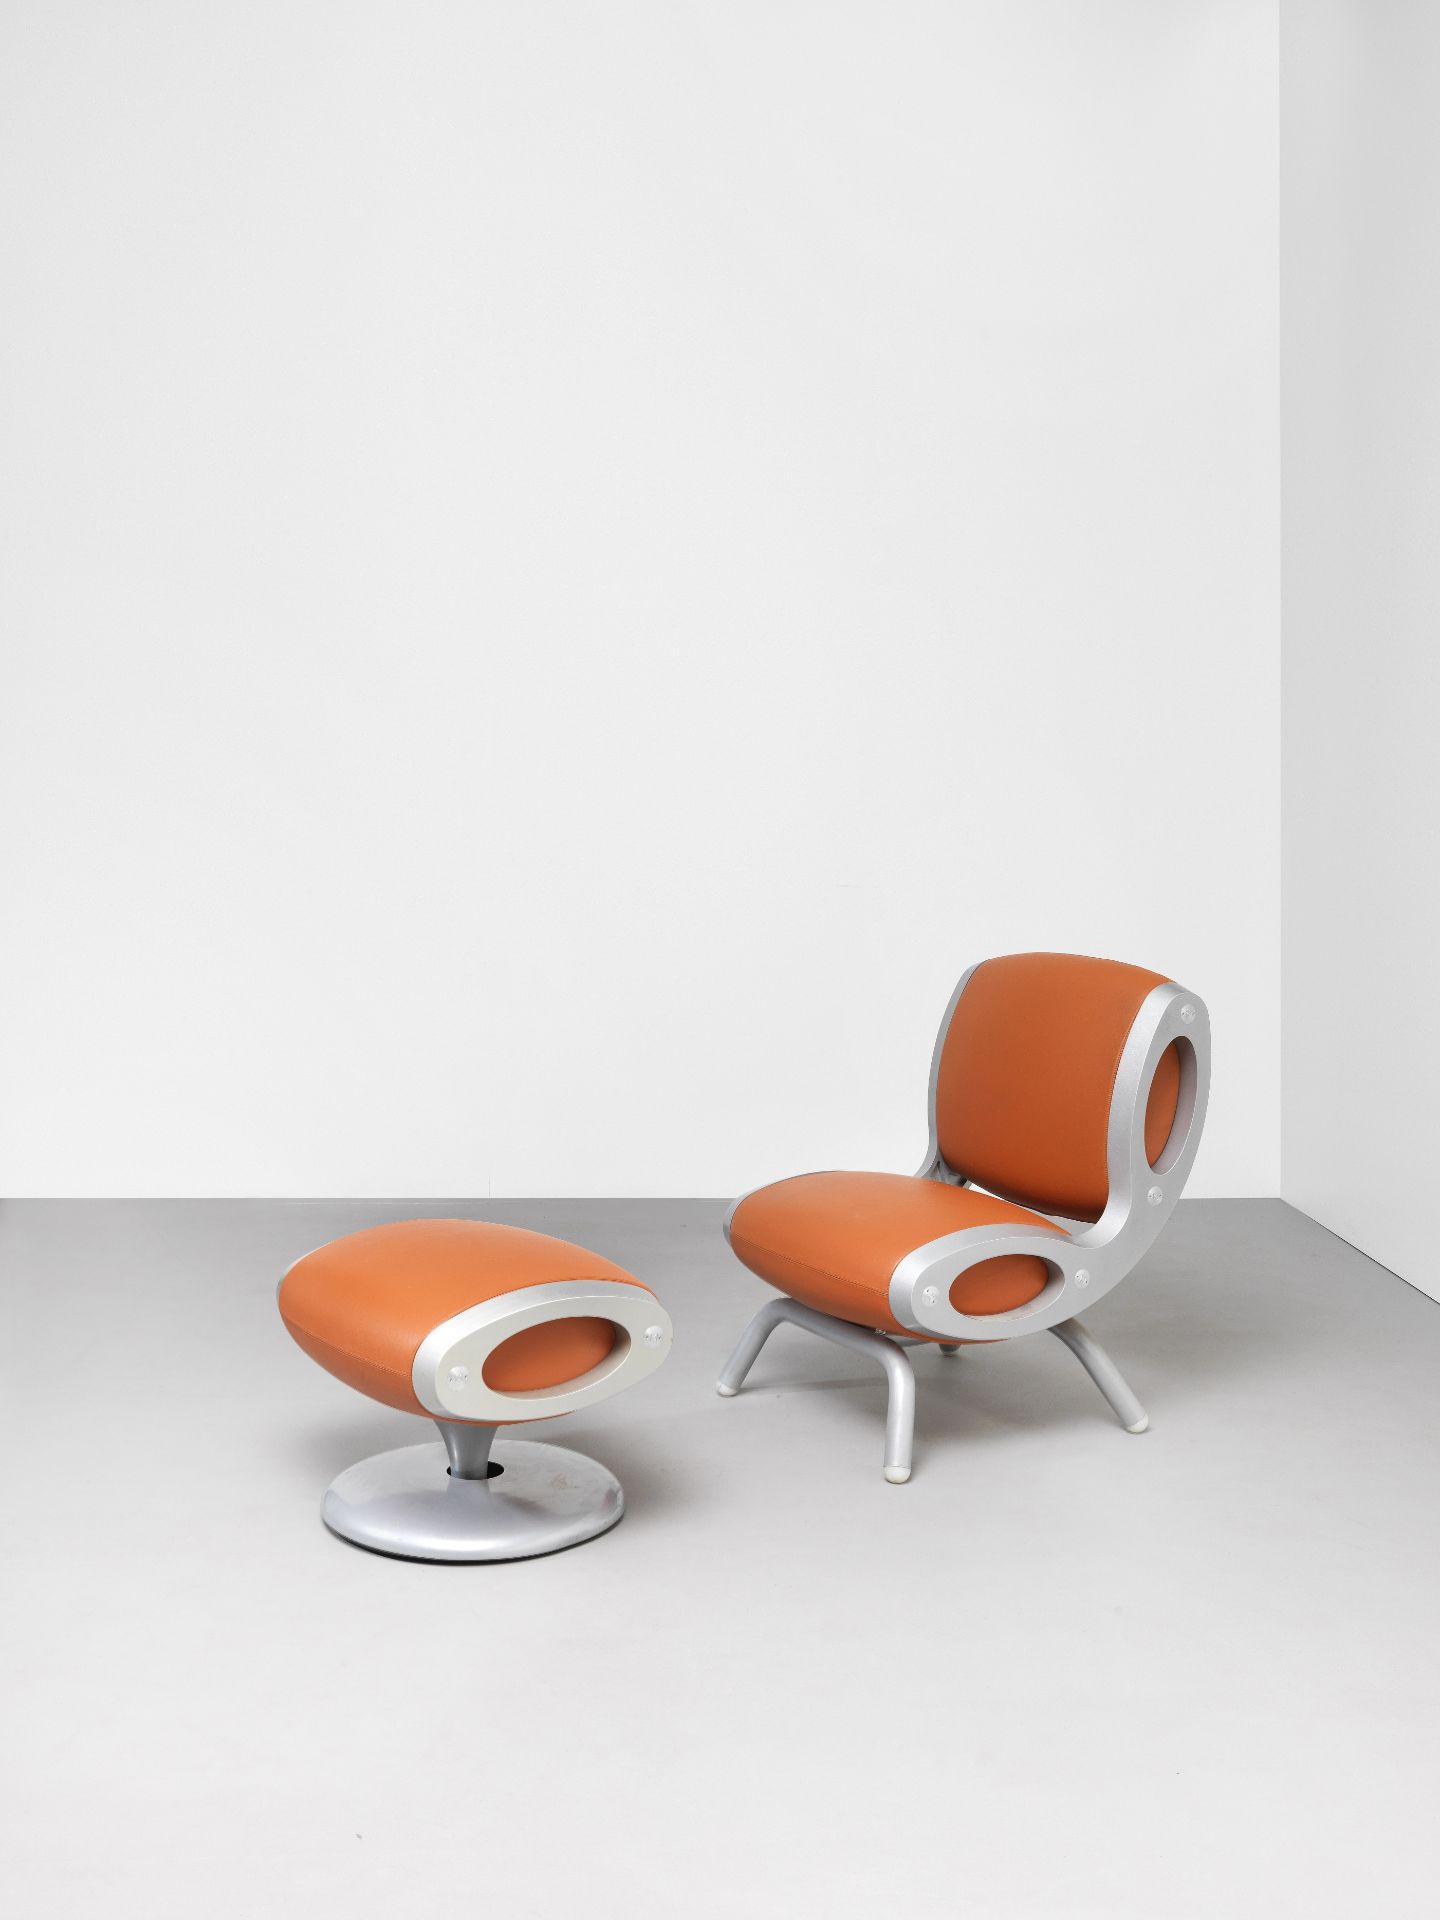 Marc Newson 'Gluon' chair and footstool, designed 1993